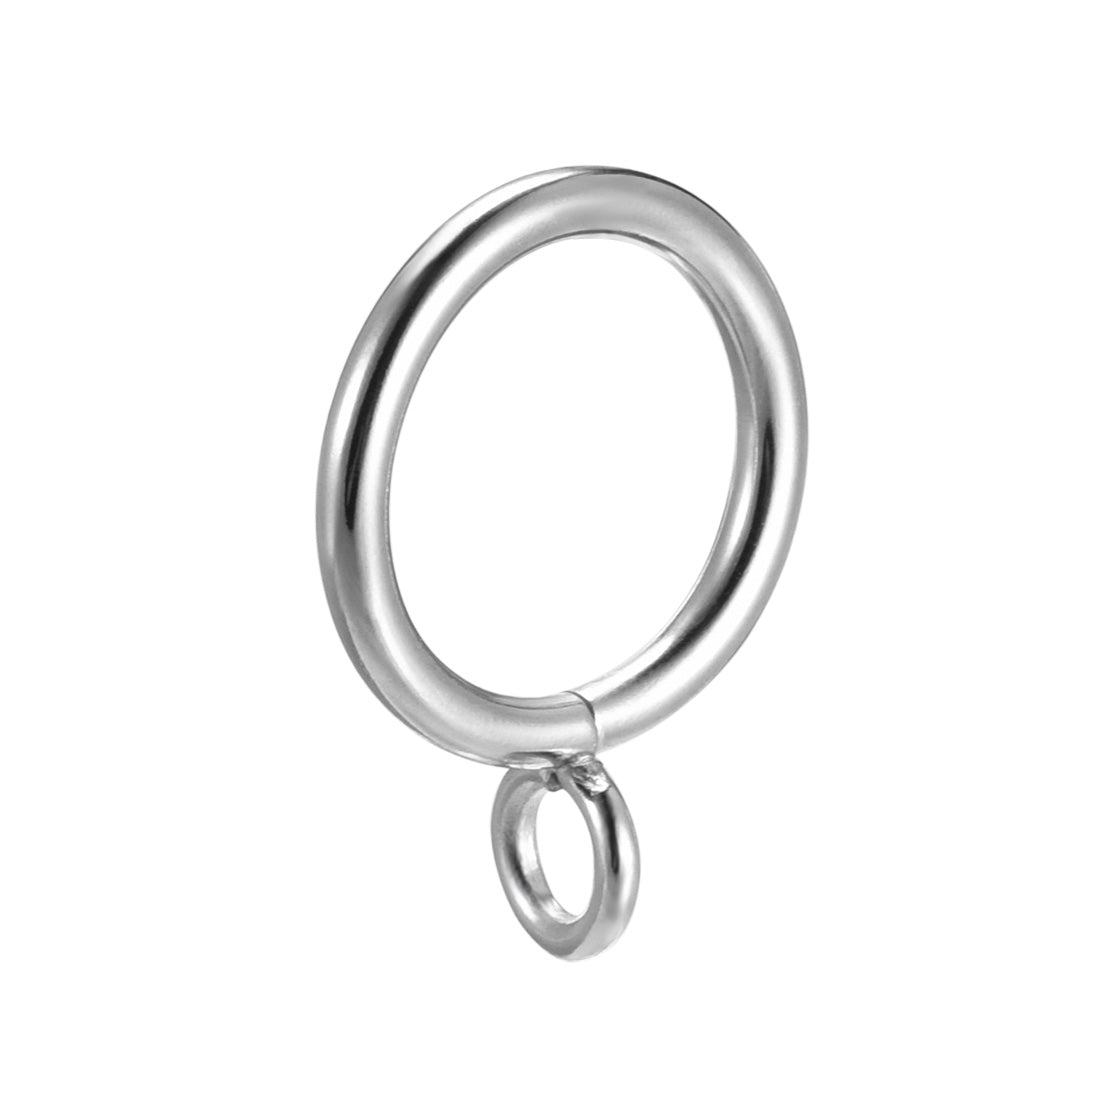 Uxcell Uxcell Curtain Rings Metal 28mm Inner Dia Drapery Ring for Curtain Rods Silver Tone 16 Pcs